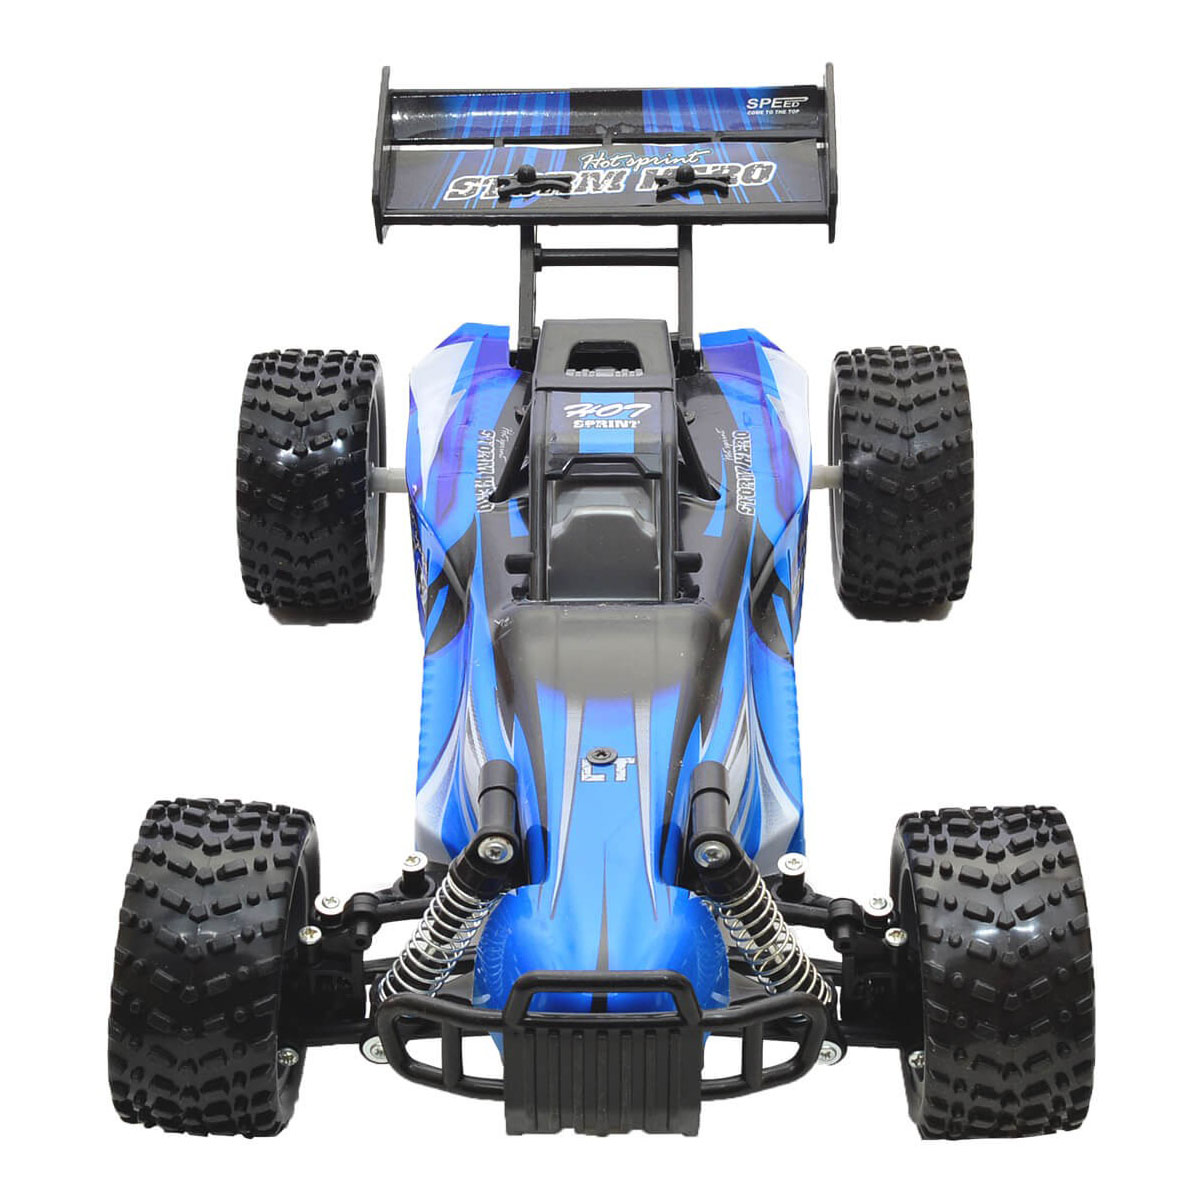 Cross Country Rc Car Blue